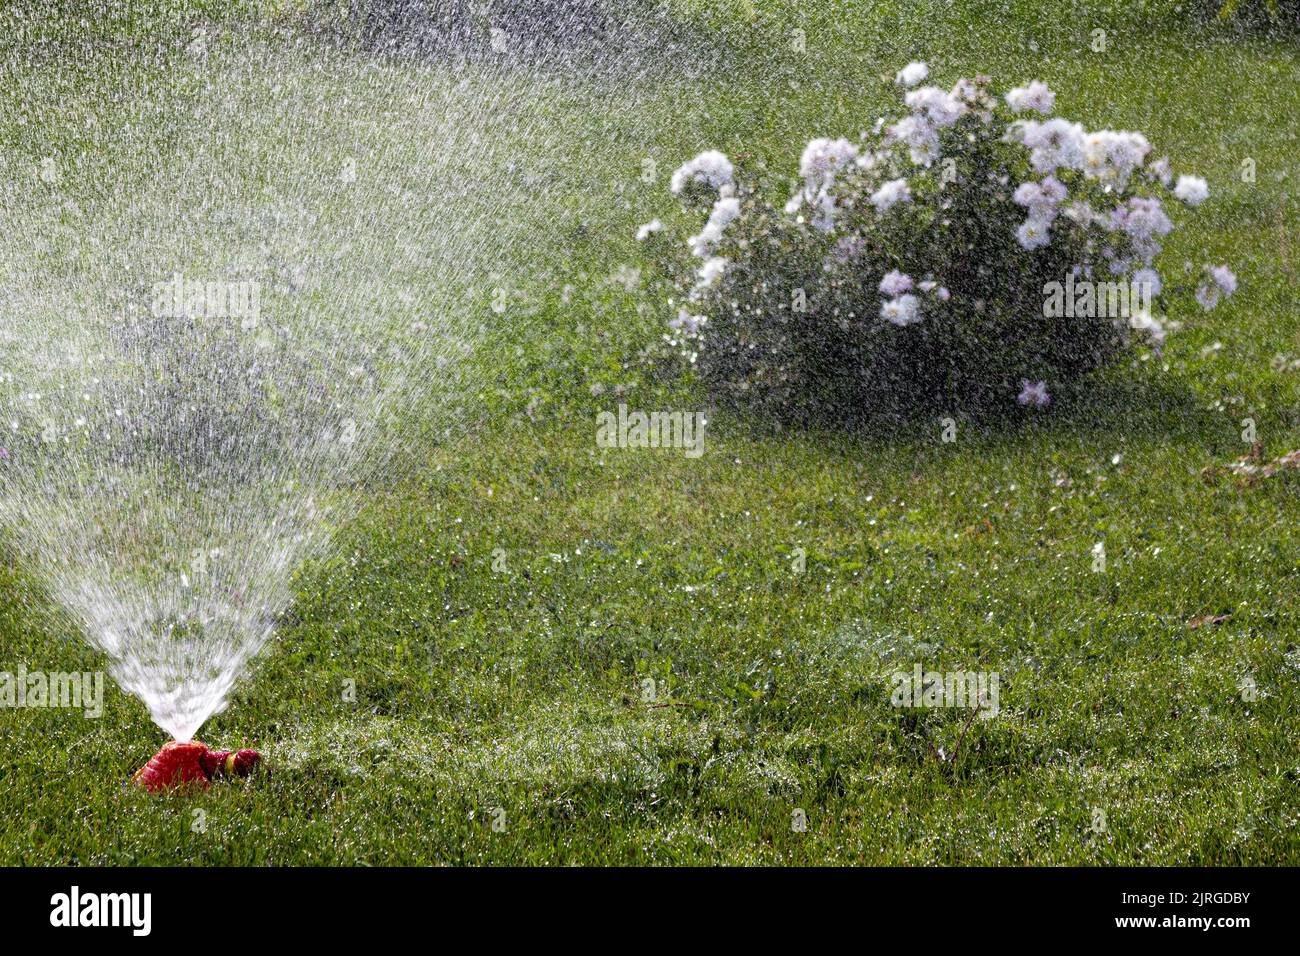 Automatic watering system of garden plants. Stock Photo